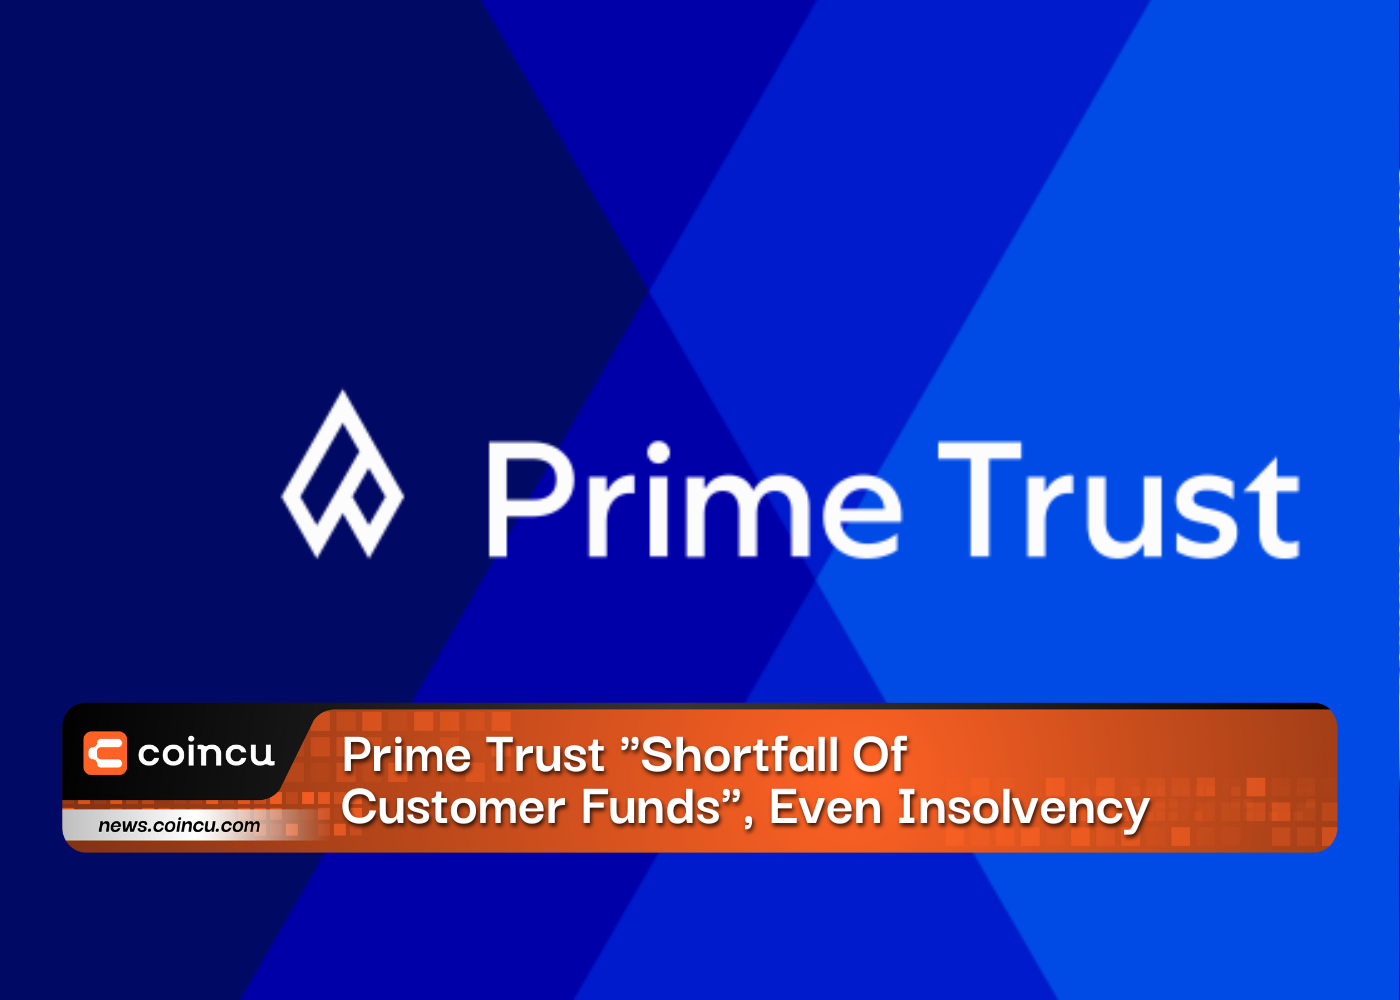 Prime Trust "Shortfall Of Customer Funds", Even Insolvency